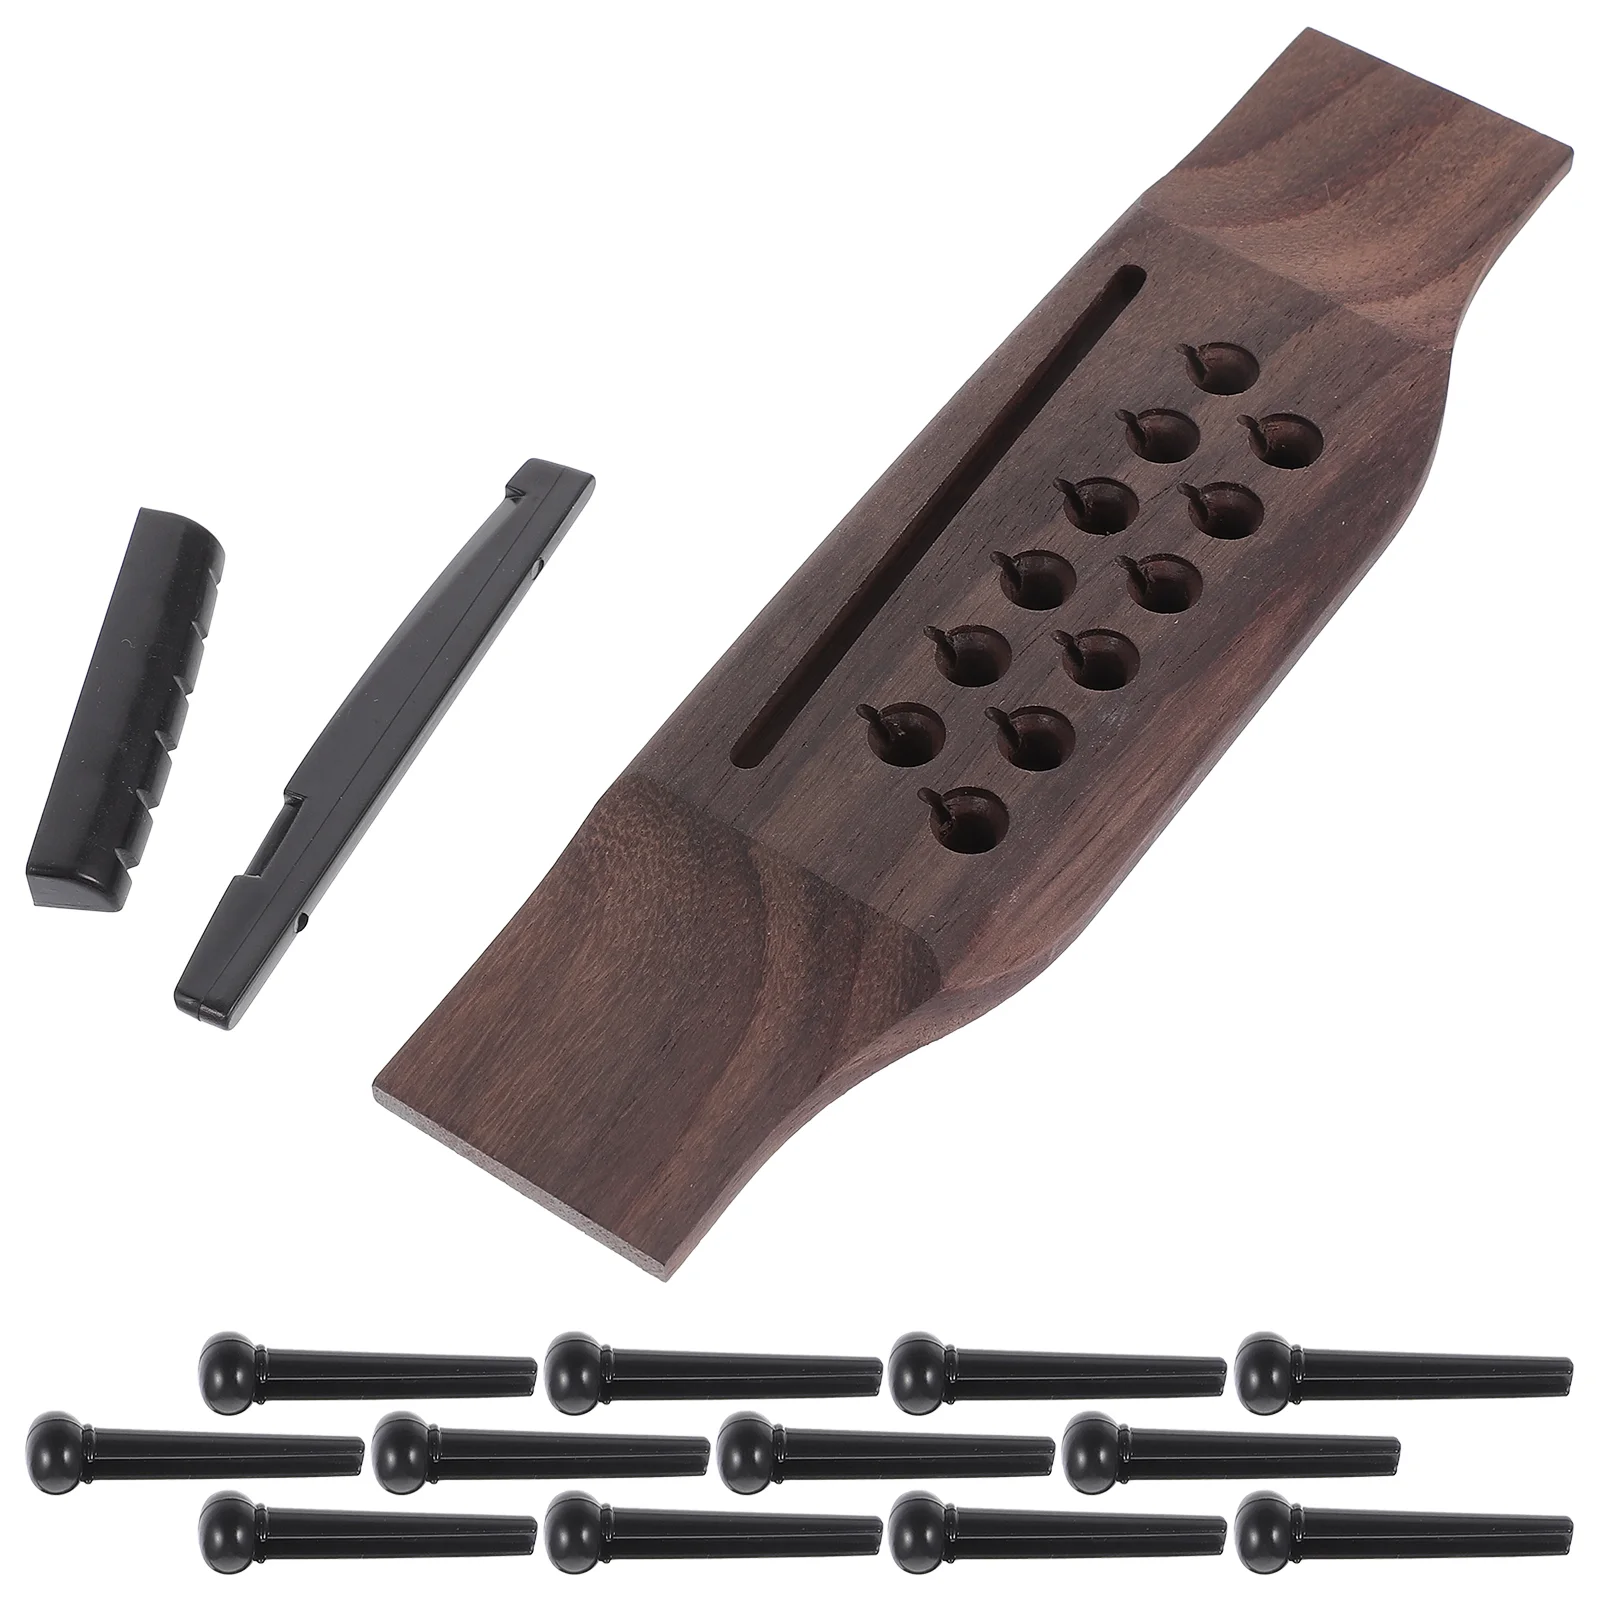 

Acoustic Guitar Accessories 12-string Folk Rosewood Bridge Twelve-hole Lower Saddle Nail Upper and Pillow Set Pegs